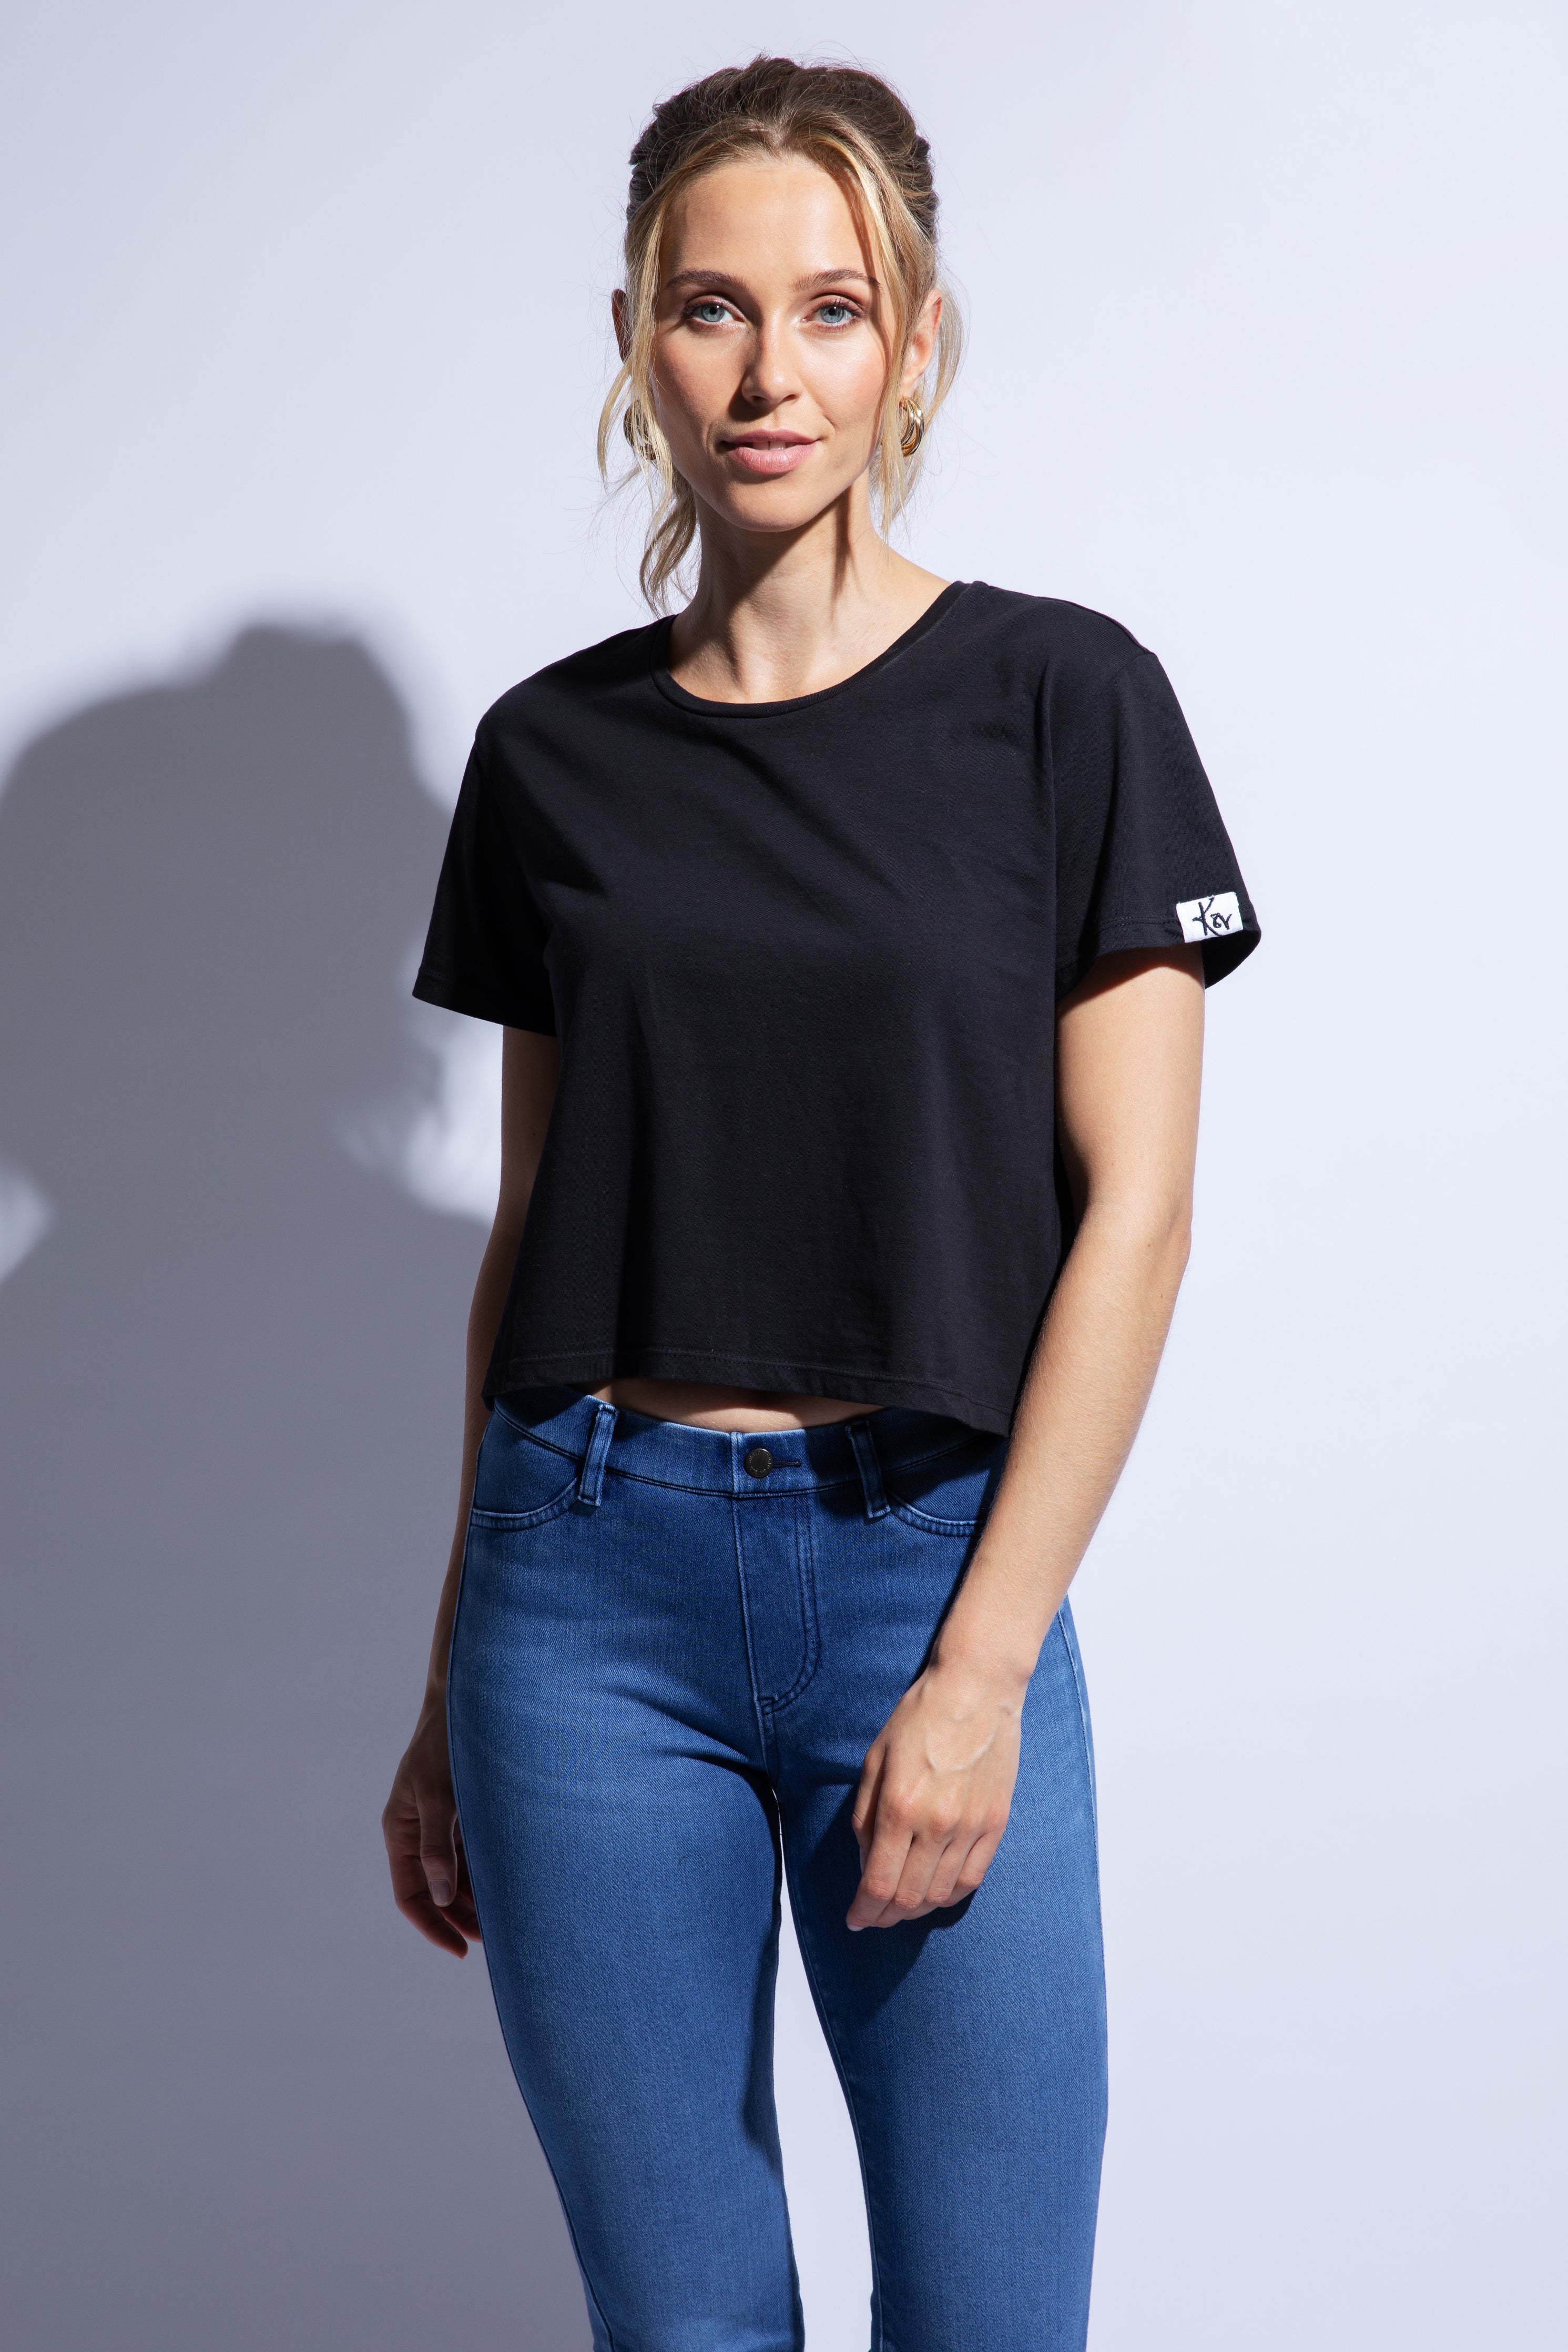 Model wears cropped black boxy fit t-shirt with logo on sleeve and jeans